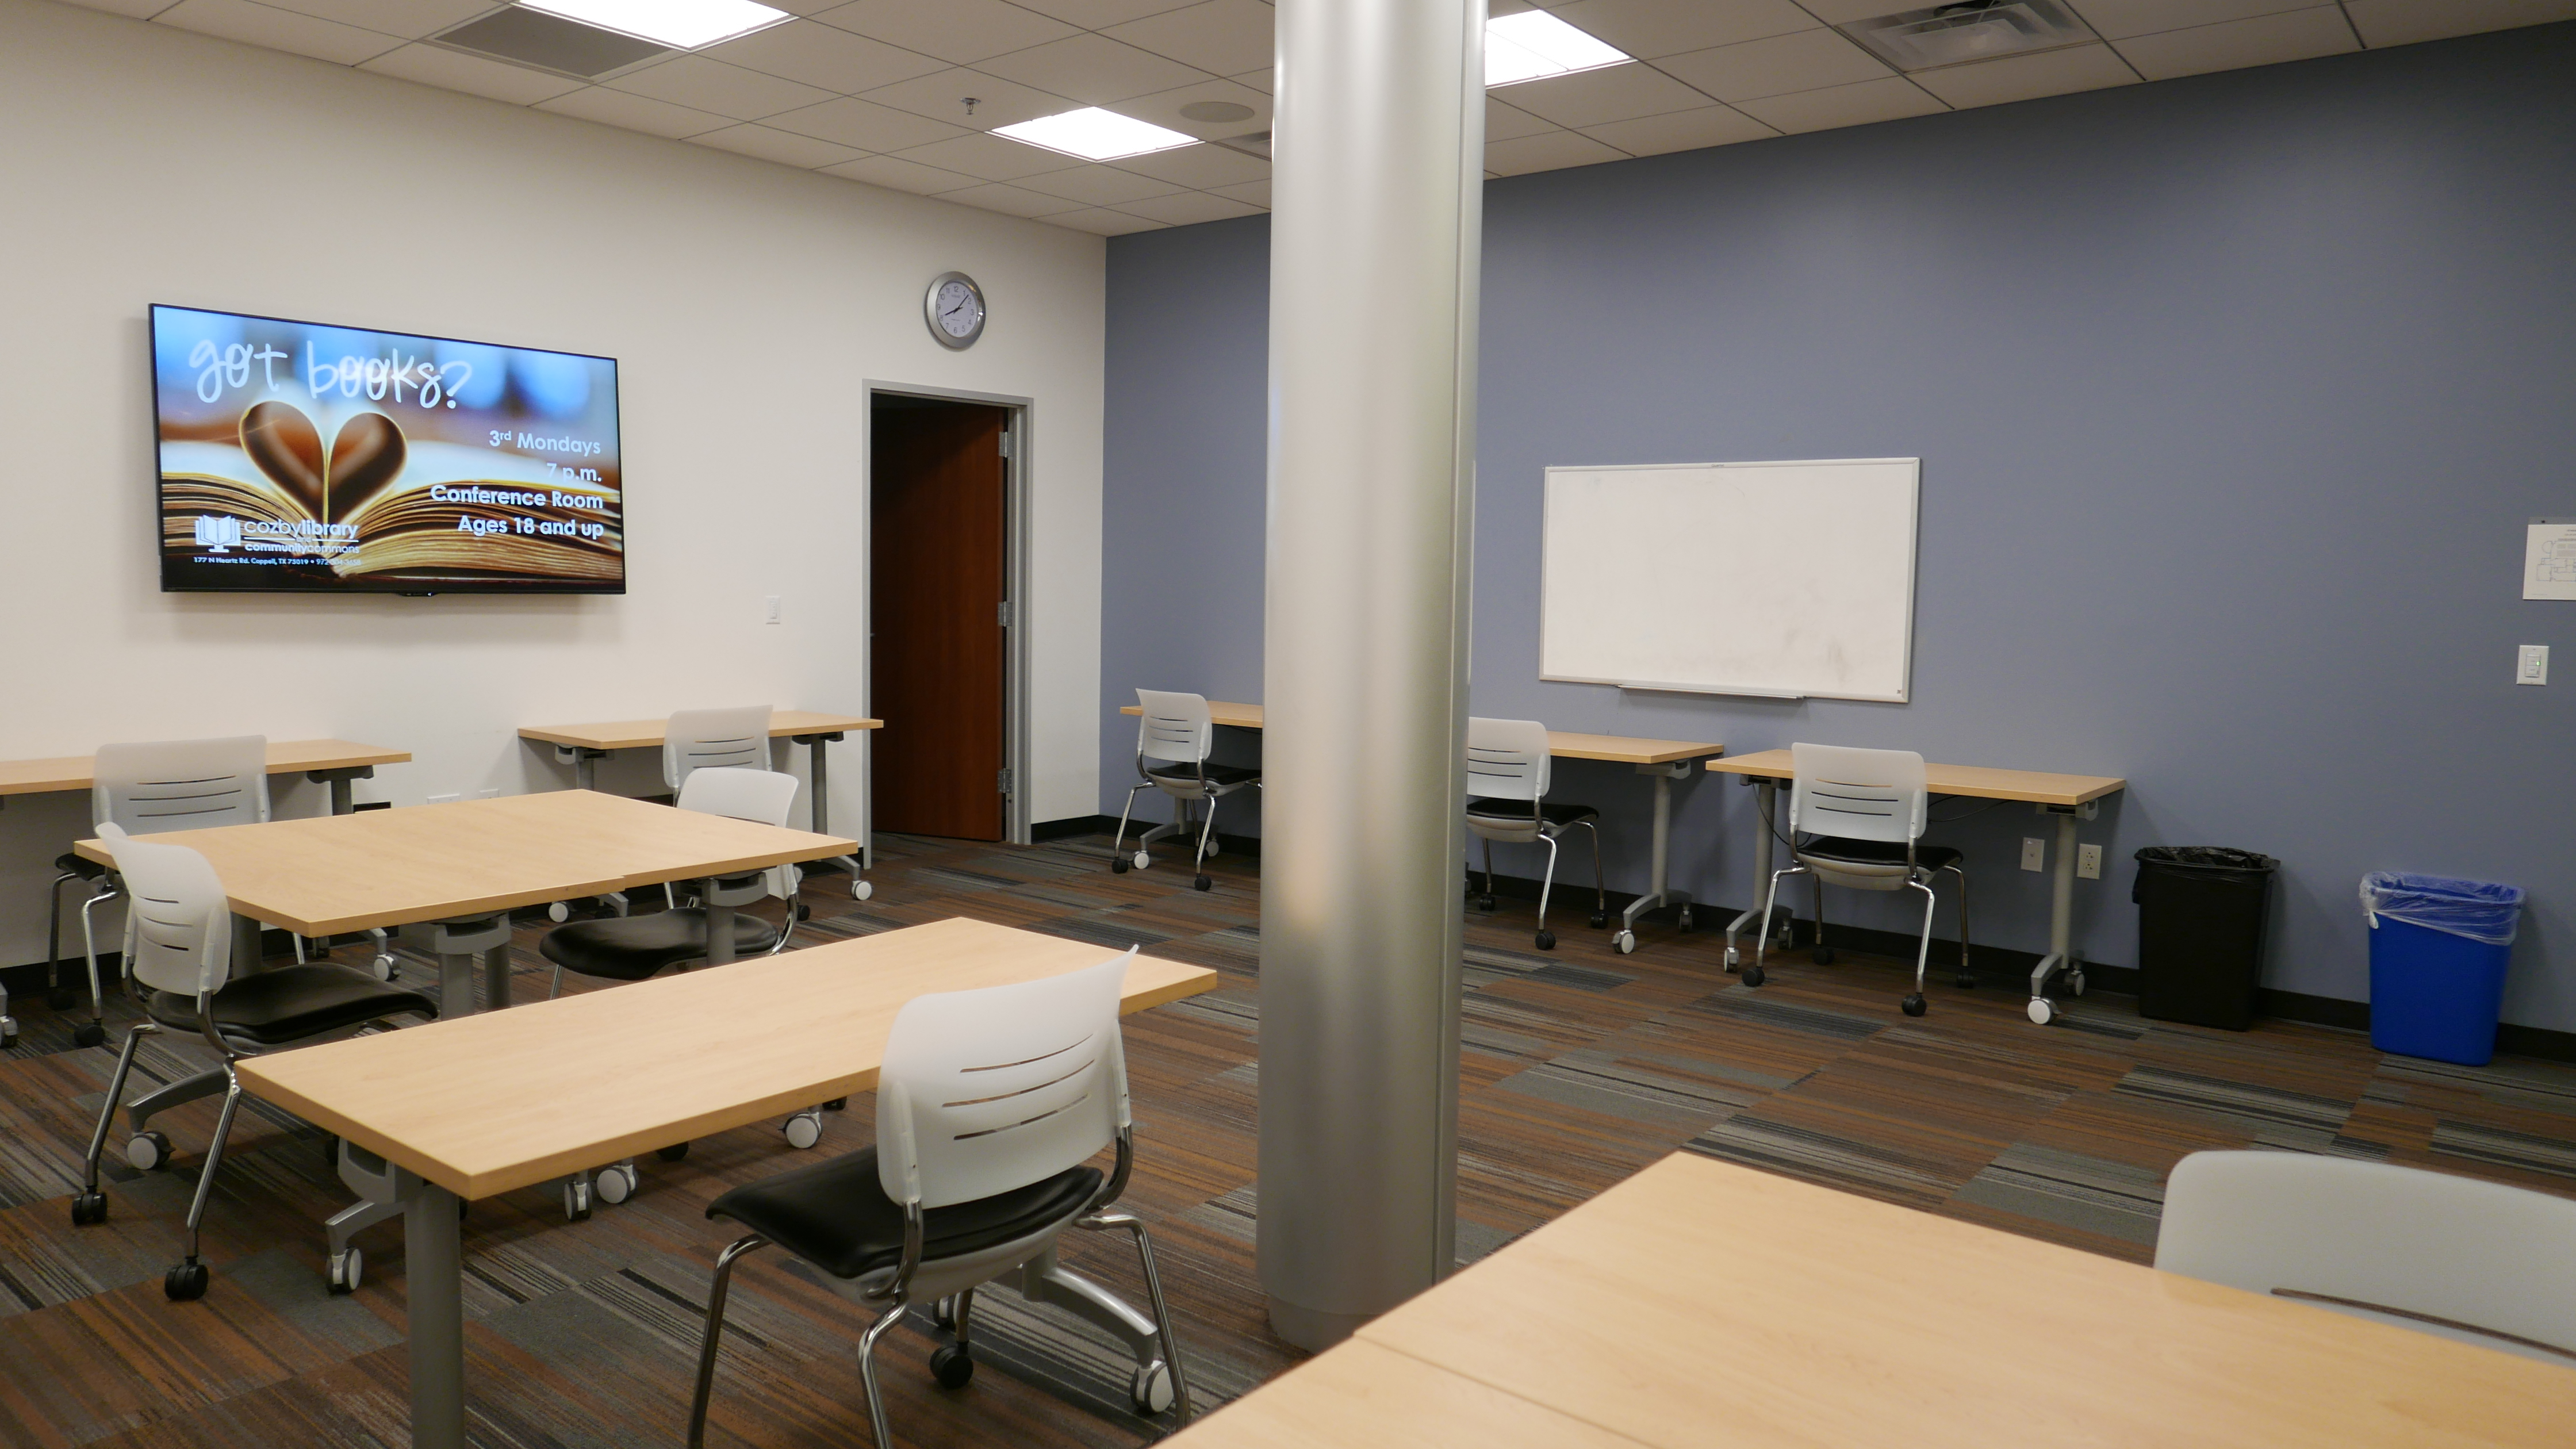 Business Center with various rectangular tables, chairs, white board, and mounted monitor